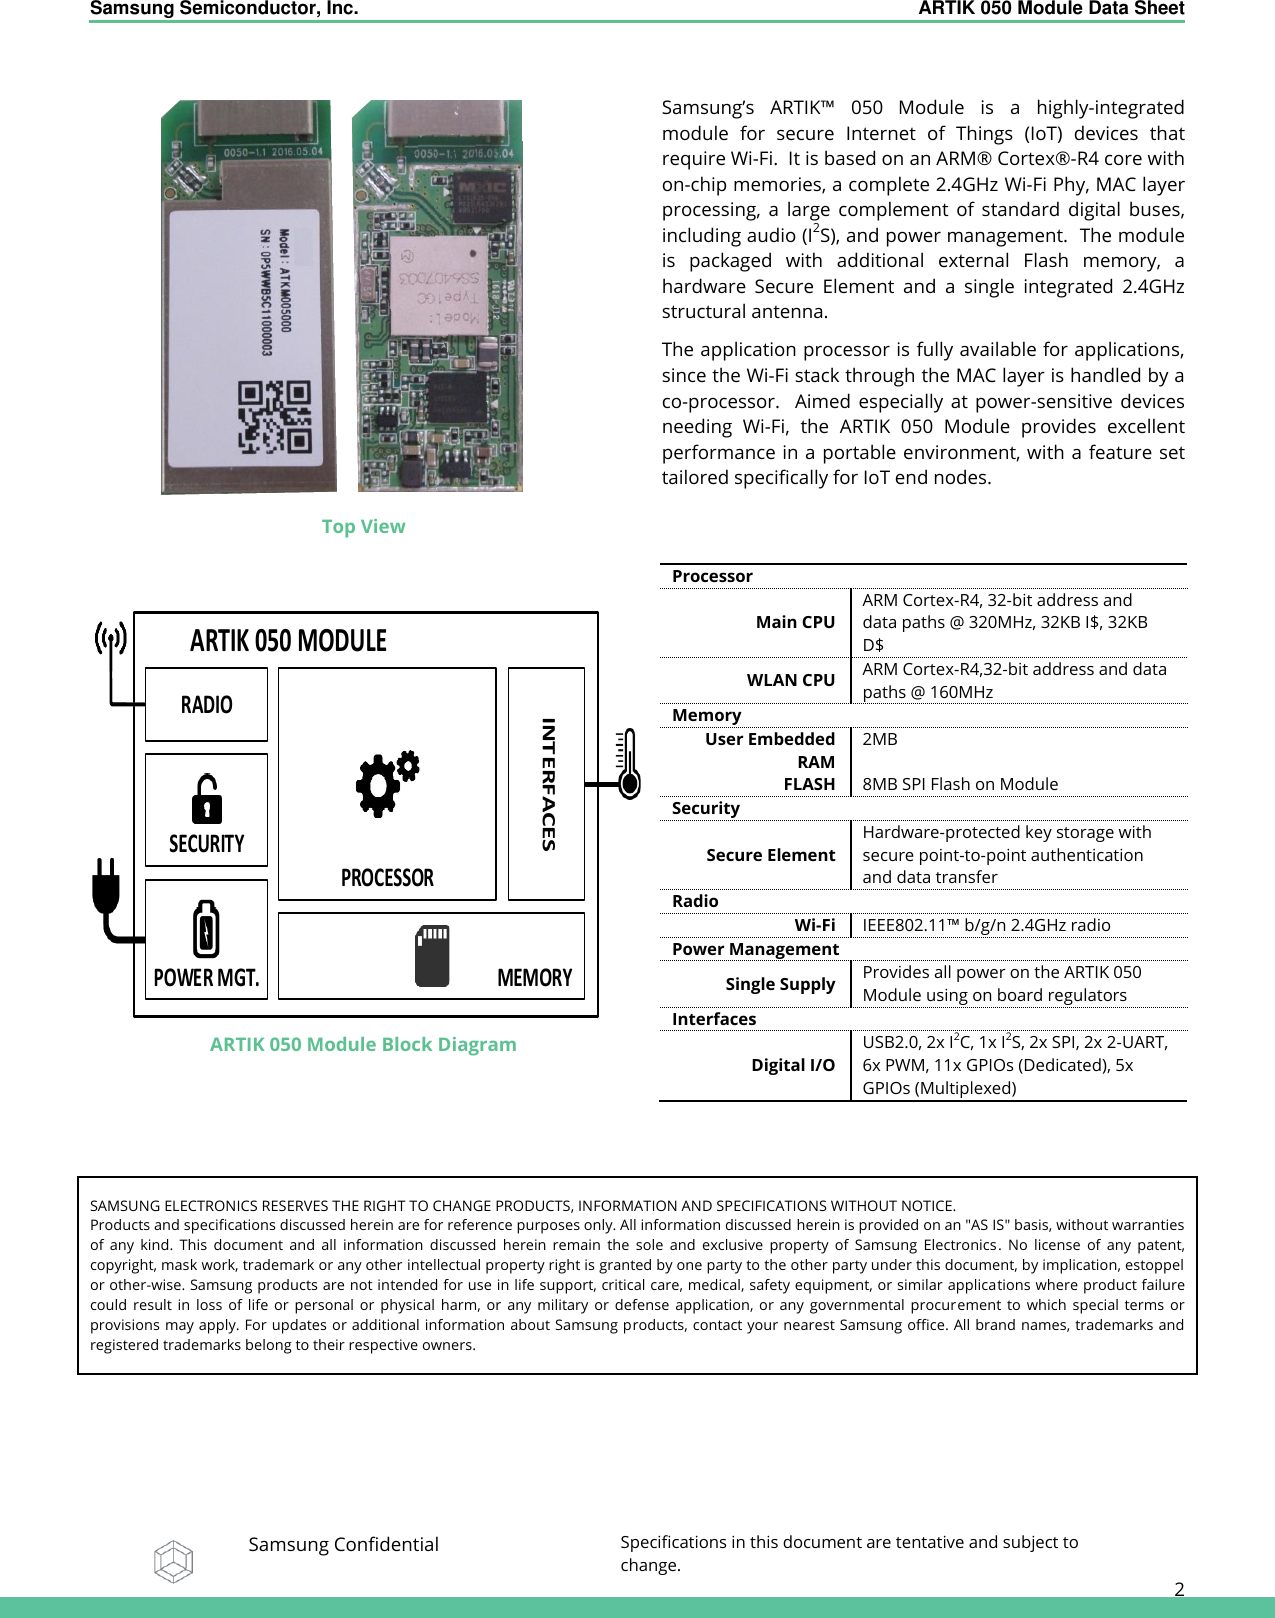 Samsung Semiconductor, Inc.  ARTIK 050 Module Data Sheet   Samsung Confidential Specifications in this document are tentative and subject to change.  2   Top View  Samsung’s  ARTIK™  050 Module  is  a  highly-integrated module  for  secure  Internet  of  Things  (IoT)  devices  that require Wi-Fi.  It is based on an ARM®  Cortex® -R4 core with on-chip memories, a complete 2.4GHz Wi-Fi Phy, MAC layer processing,  a  large  complement  of  standard  digital  buses, including audio (I2S), and power management.  The module is  packaged  with  additional  external  Flash  memory,  a hardware  Secure  Element  and  a  single  integrated  2.4GHz structural antenna. The application processor is fully available for applications, since the Wi-Fi stack through the MAC layer is handled by a co-processor.    Aimed  especially  at  power-sensitive  devices needing  Wi-Fi,  the  ARTIK  050  Module  provides  excellent performance in a portable environment, with a feature set tailored specifically for IoT end nodes.  ARTIK 050 Module Block Diagram Processor Main CPU ARM Cortex-R4, 32-bit address and data paths @ 320MHz, 32KB I$, 32KB D$ WLAN CPU ARM Cortex-R4,32-bit address and data paths @ 160MHz Memory User Embedded RAM 2MB FLASH 8MB SPI Flash on Module Security Secure Element Hardware-protected key storage with secure point-to-point authentication and data transfer Radio Wi-Fi IEEE802.11™ b/g/n 2.4GHz radio Power Management Single Supply Provides all power on the ARTIK 050 Module using on board regulators Interfaces Digital I/O USB2.0, 2x I2C, 1x I2S, 2x SPI, 2x 2-UART, 6x PWM, 11x GPIOs (Dedicated), 5x GPIOs (Multiplexed)    SAMSUNG ELECTRONICS RESERVES THE RIGHT TO CHANGE PRODUCTS, INFORMATION AND SPECIFICATIONS WITHOUT NOTICE. Products and specifications discussed herein are for reference purposes only. All information discussed herein is provided on an &quot;AS IS&quot; basis, without warranties of  any  kind.  This  document  and  all  information  discussed  herein  remain  the  sole  and  exclusive  property  of  Samsung  Electronics.  No  license  of  any  patent, copyright, mask work, trademark or any other intellectual property right is granted by one party to the other party under this document, by implication, estoppel or other-wise. Samsung products are not intended for use in life support, critical care, medical, safety equipment, or similar applications where product failure could  result  in  loss  of  life  or  personal  or  physical  harm,  or  any  military  or  defense  application,  or  any  governmental  procurement  to  which  special  terms  or provisions may apply. For updates or additional information about Samsung products, contact your nearest Samsung office. All brand names, trademarks and registered trademarks belong to their respective owners. ARTIK 050 MODULERADIOSECURITYPROCESSORPOWER MGT. MEMORYINTERFACES